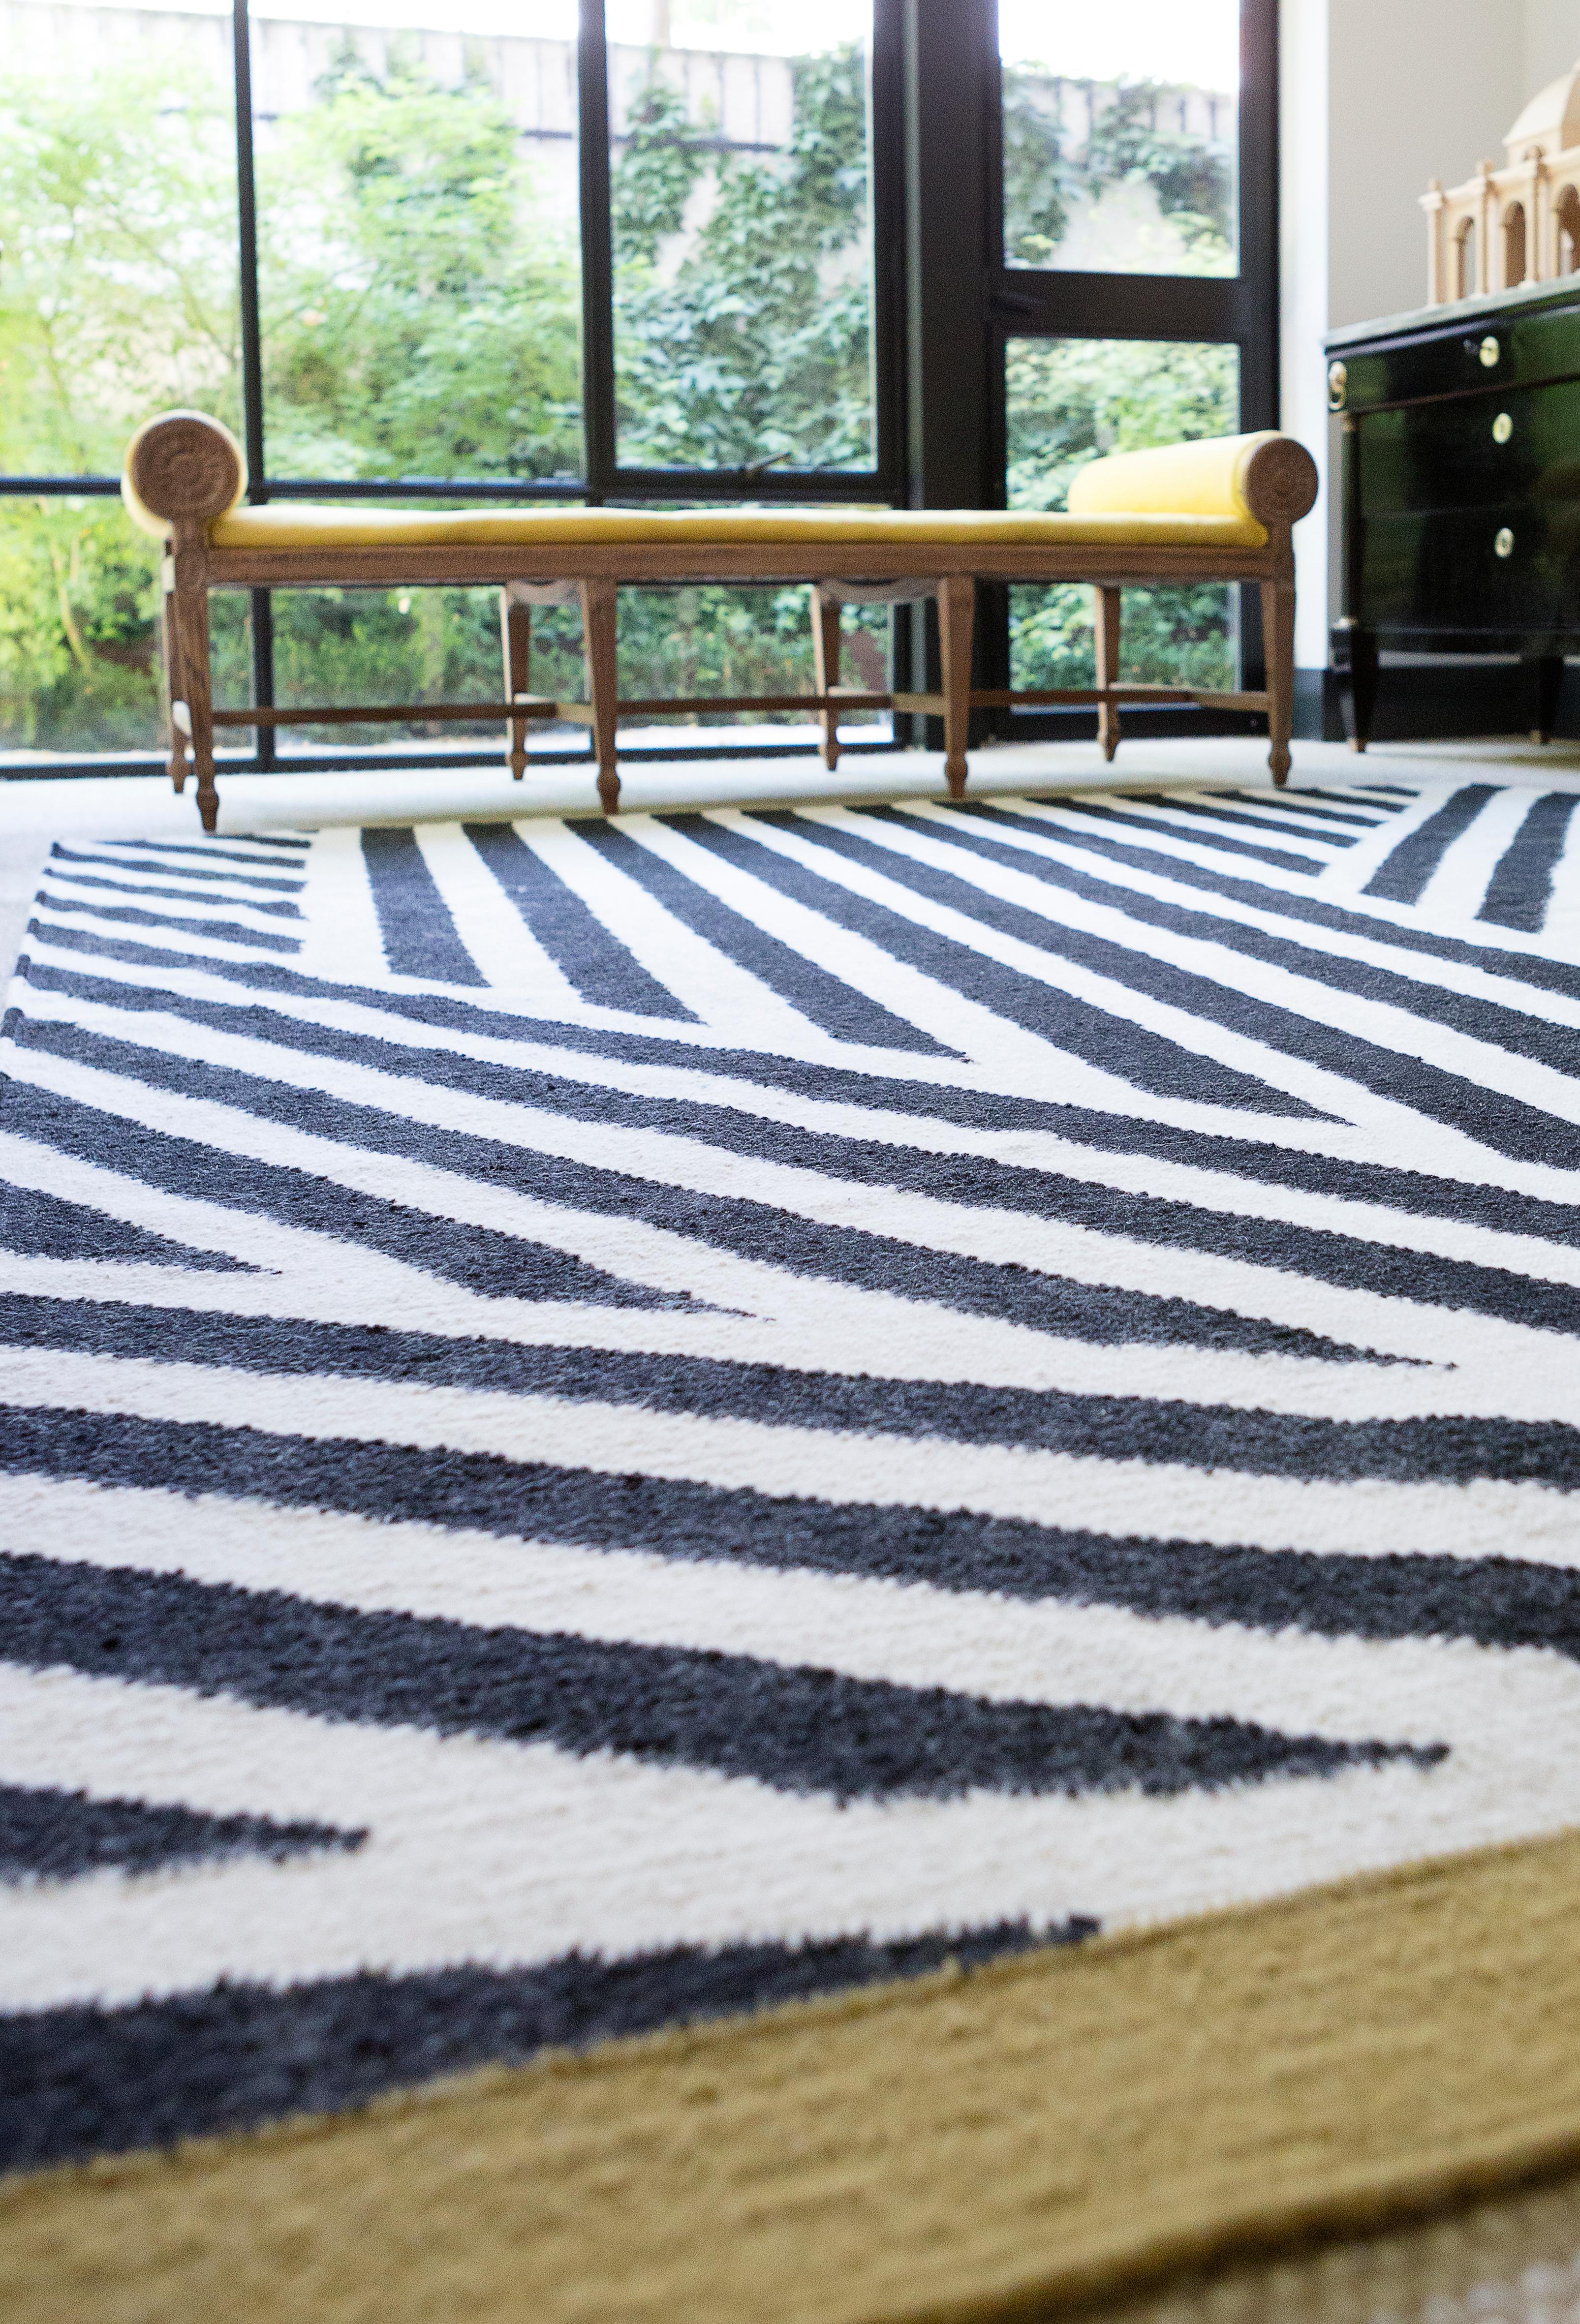 Café is a Luisa Olazábal's desing for Kilombo Home.

This rug has been ethically handwoven in the finest wool yarns by artisans in north of India, using a traditional weaving technique which is native of this region.
Each rug is handwoven with